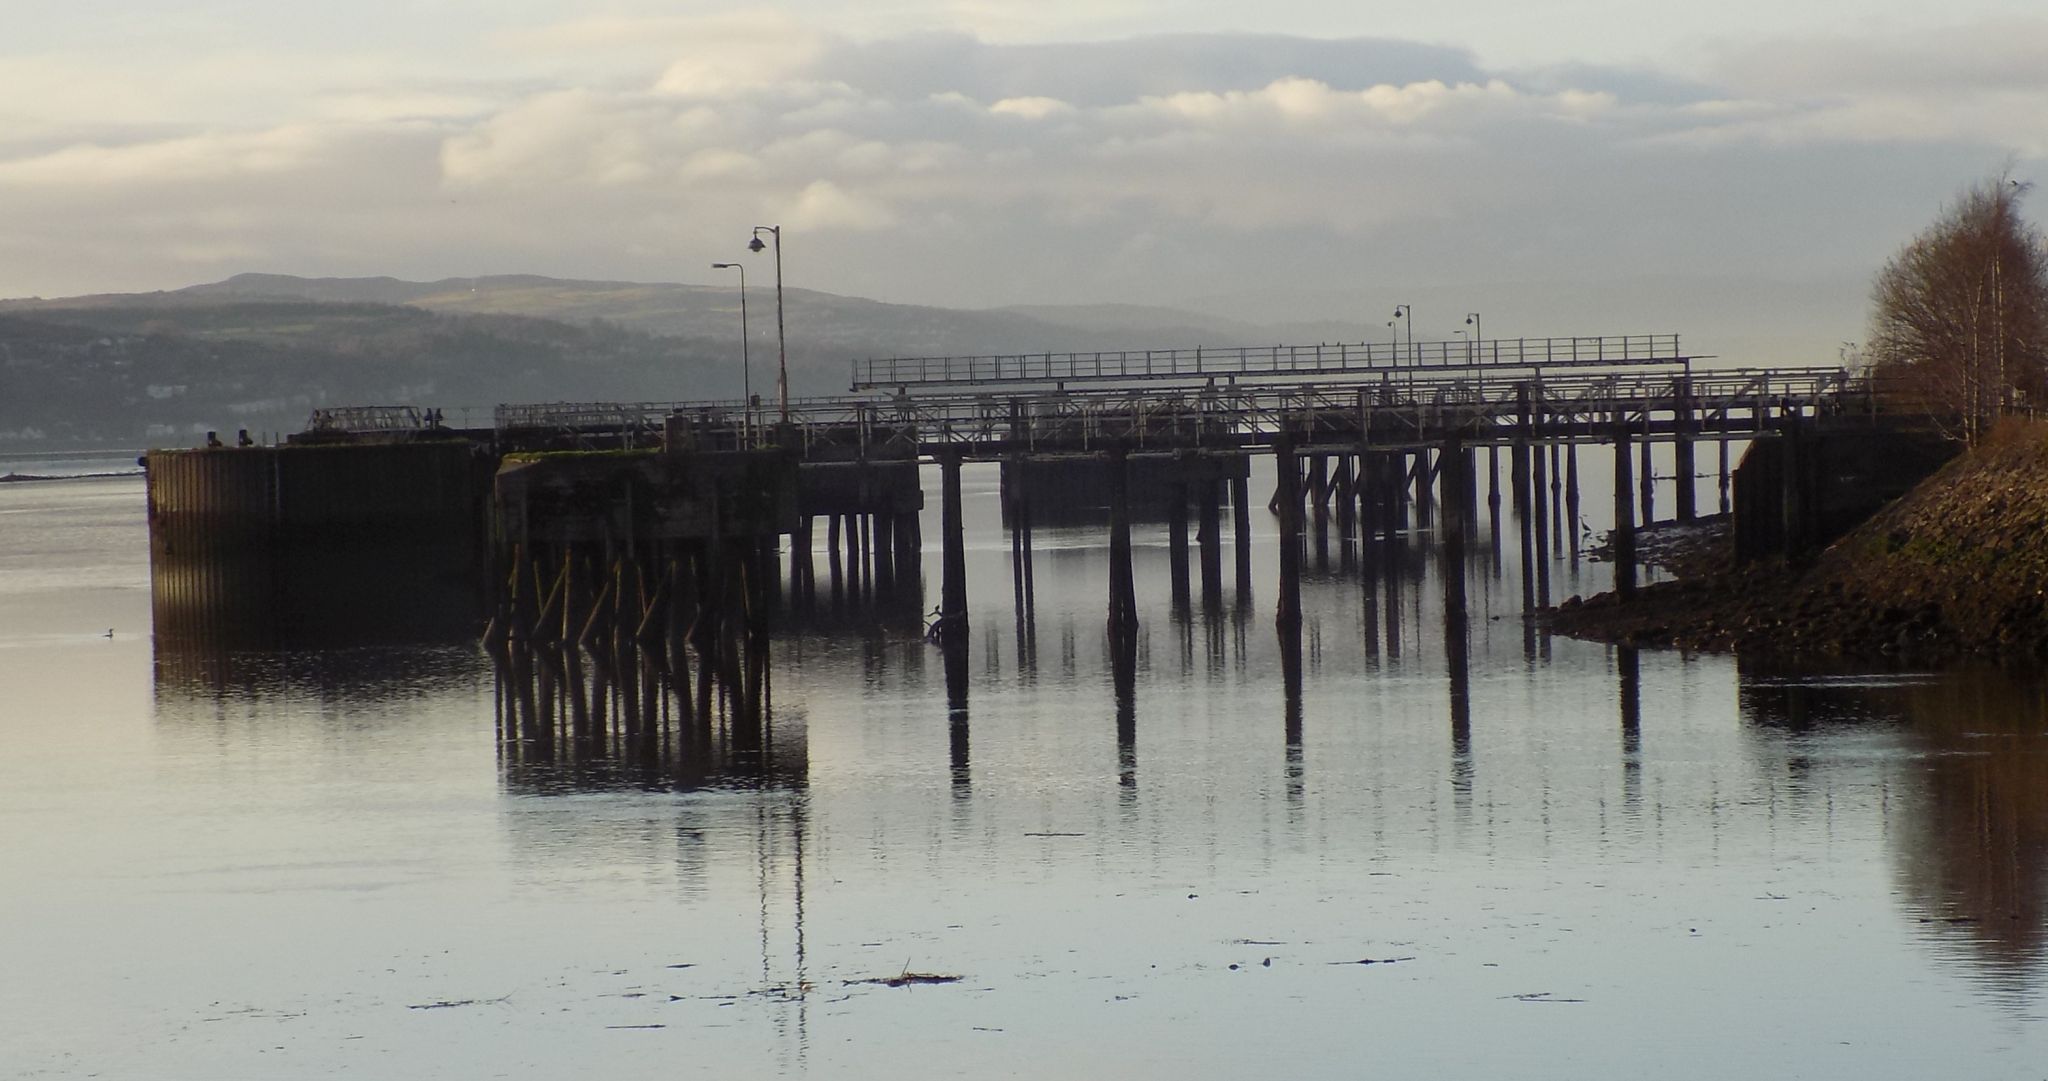 Old docks at Bowling on the River Clyde